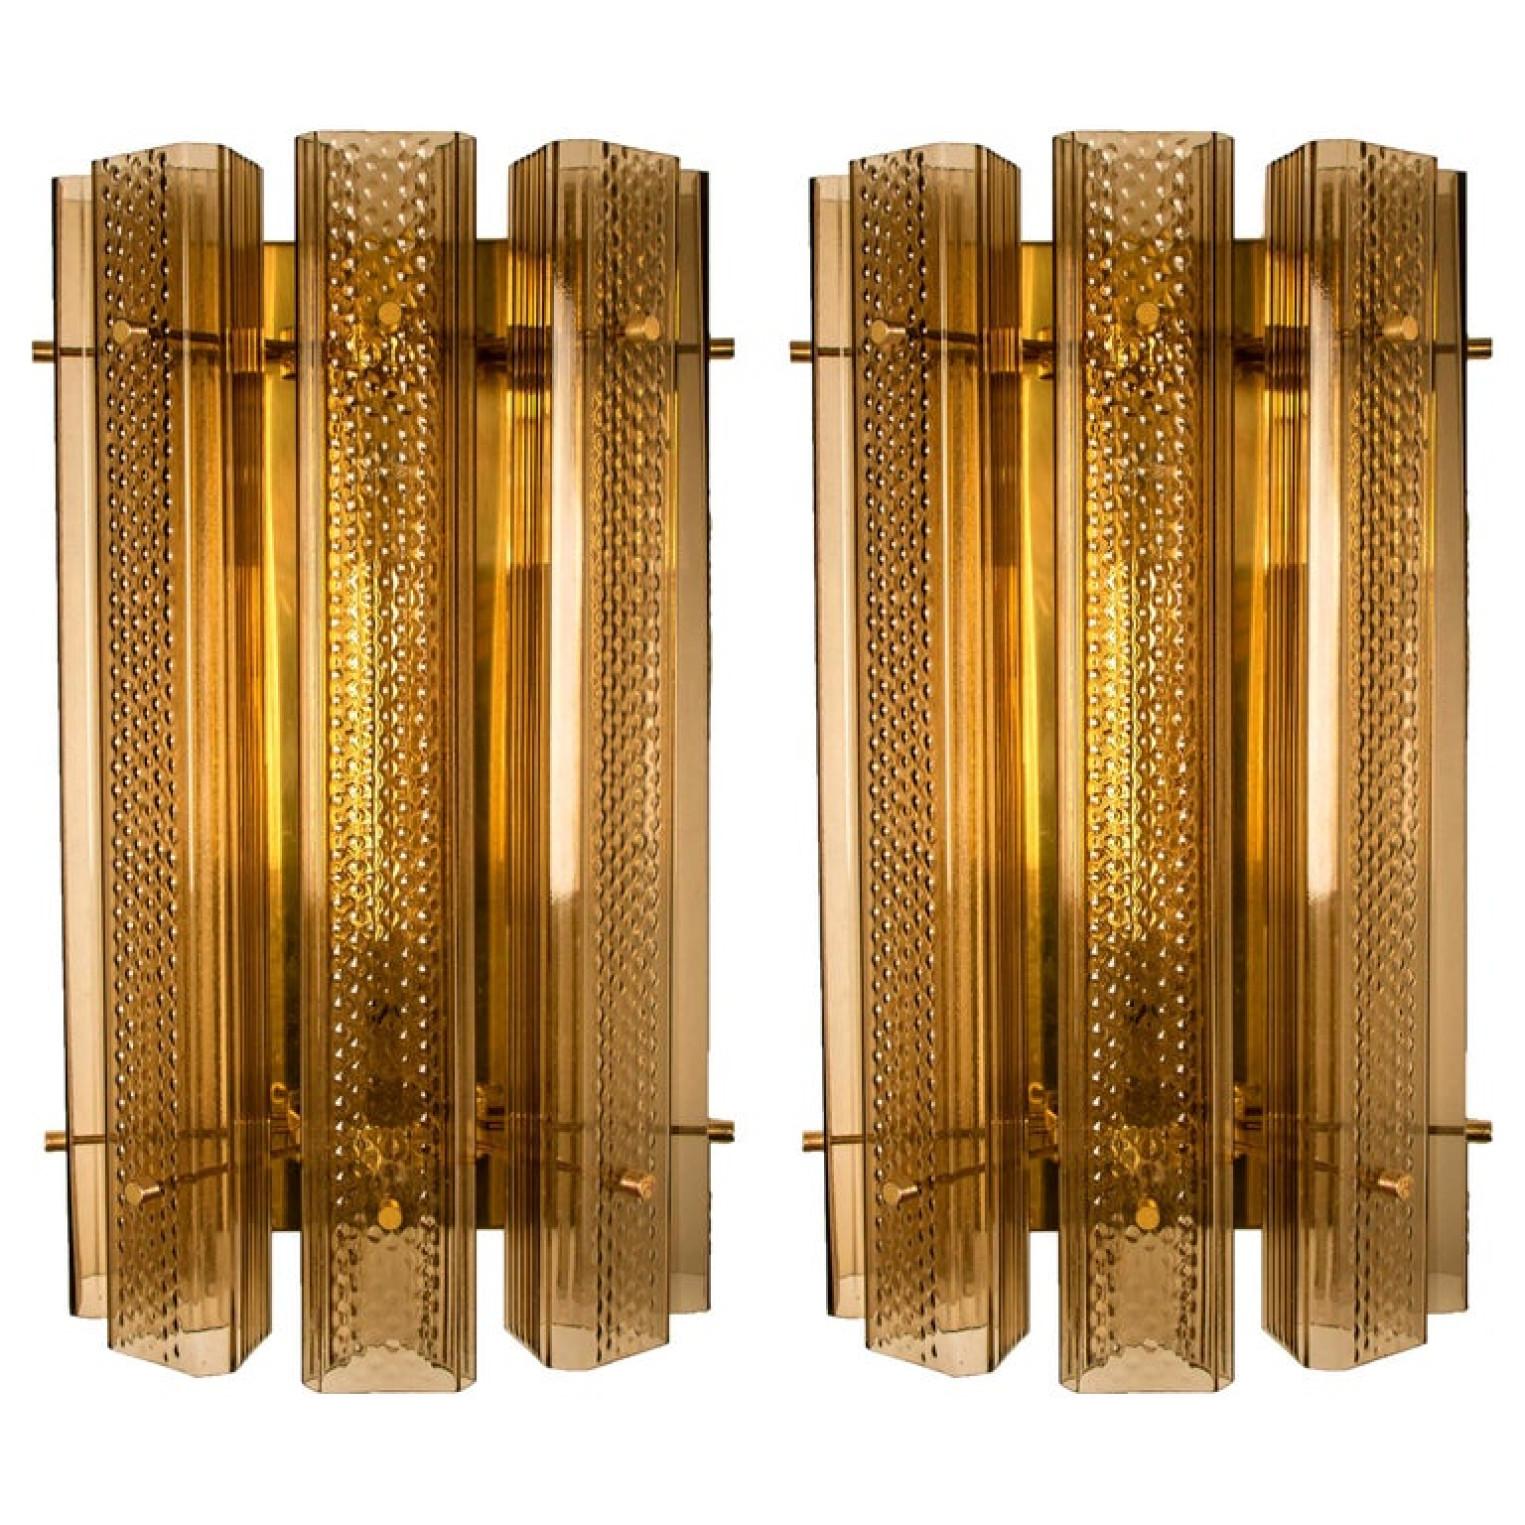 Pair of wonderful extra large Murano wall sconces, manufactured in the 1970s. The lights feature a brass frame with five large Murano square tubes in clear and smoked textured glass. With brass details. The tubes diffuse the light beautifully to